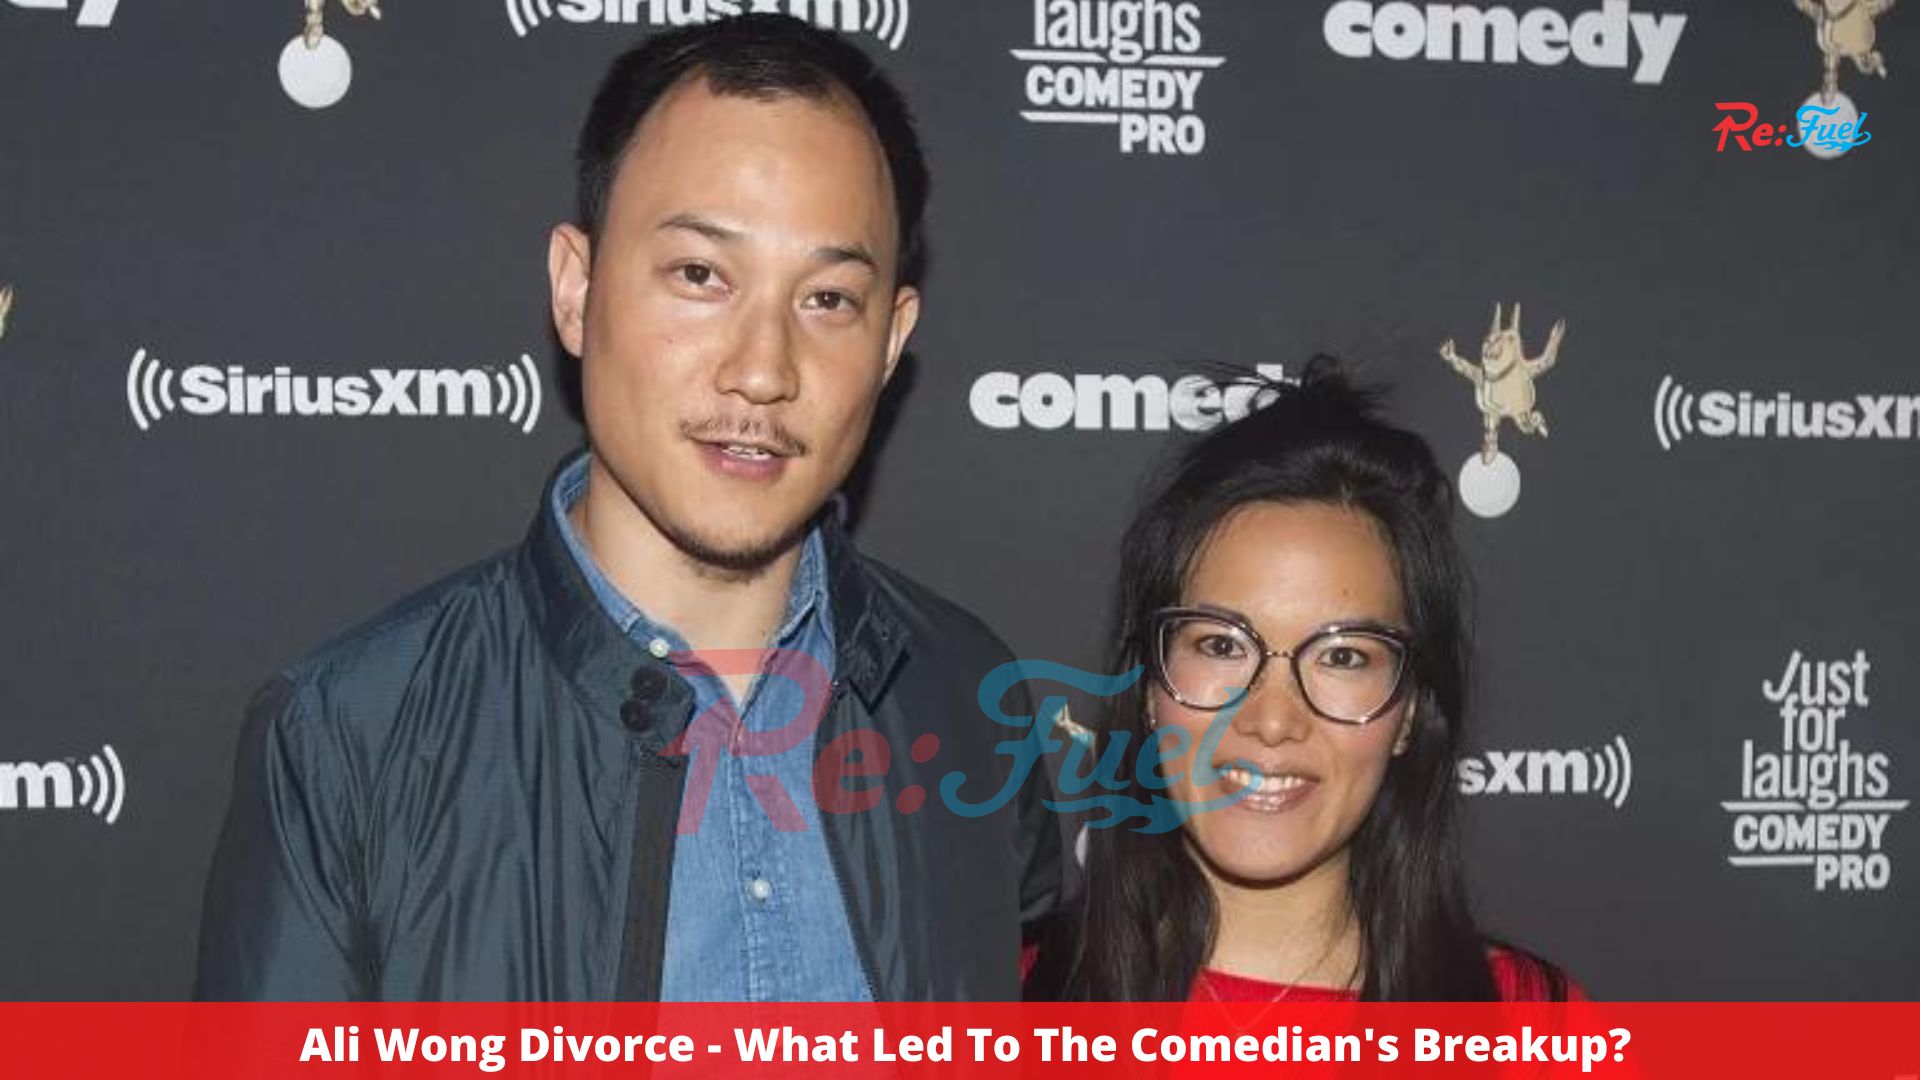 Ali Wong Divorce - What Led To The Comedian's Breakup?